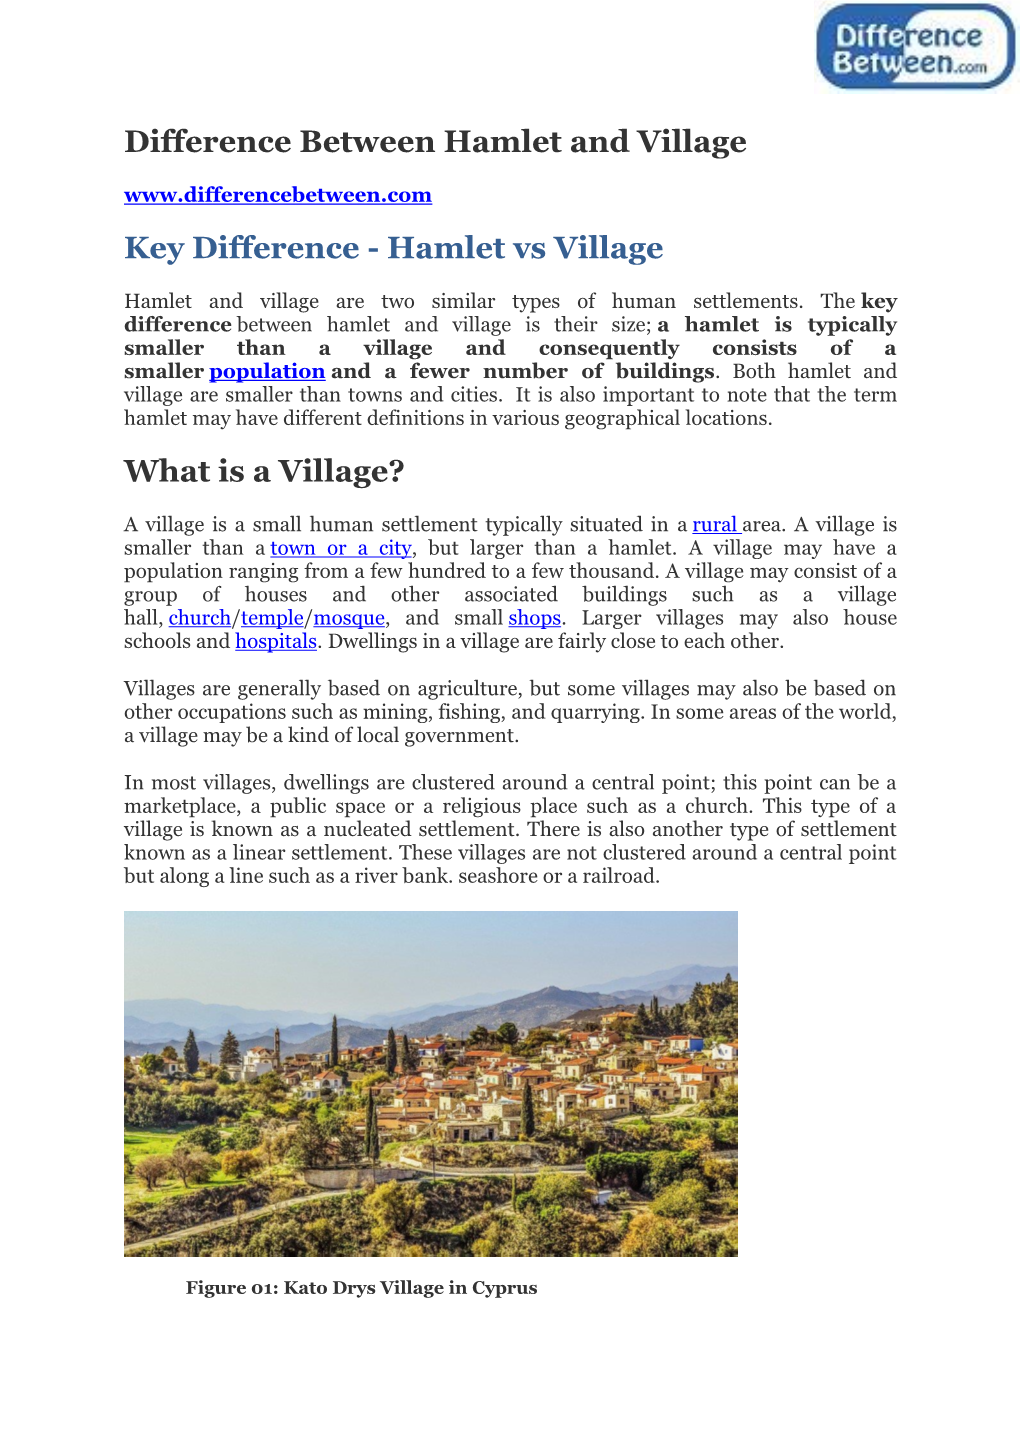 Difference Between Hamlet and Village Key Difference - Hamlet Vs Village